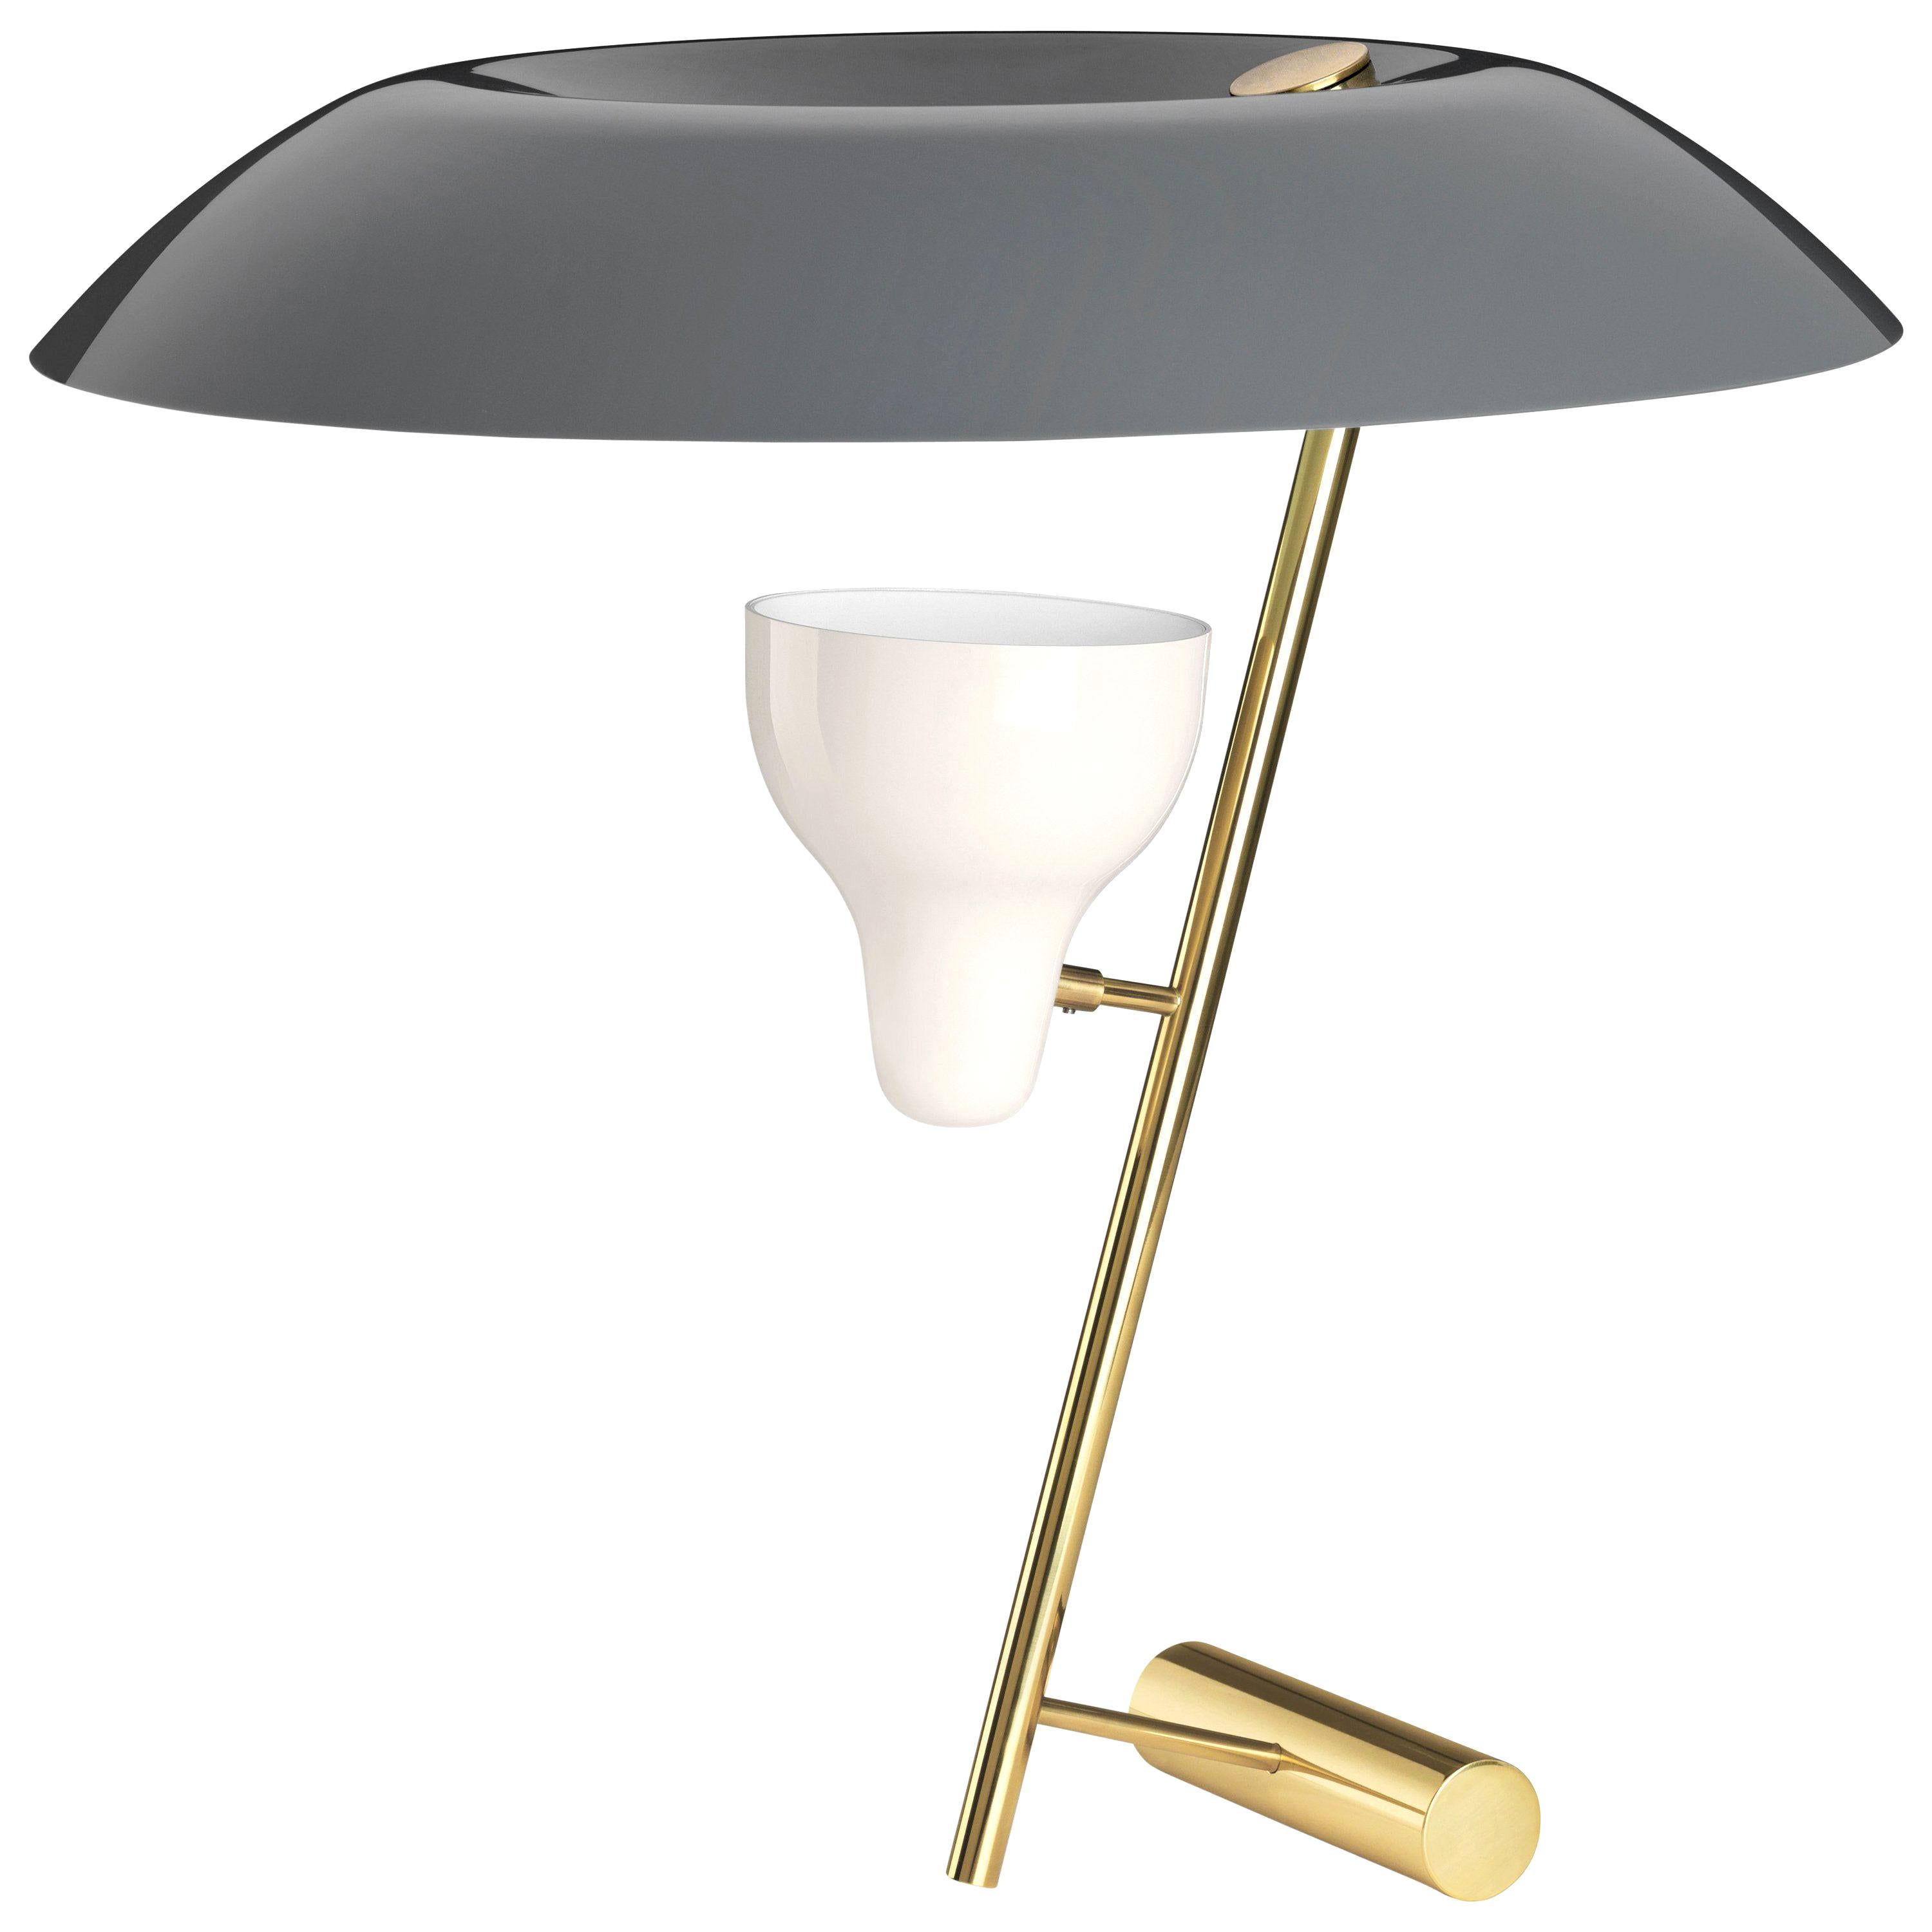 Gino Sarfatti Model #548 Table Lamp in Gray and Polished Brass